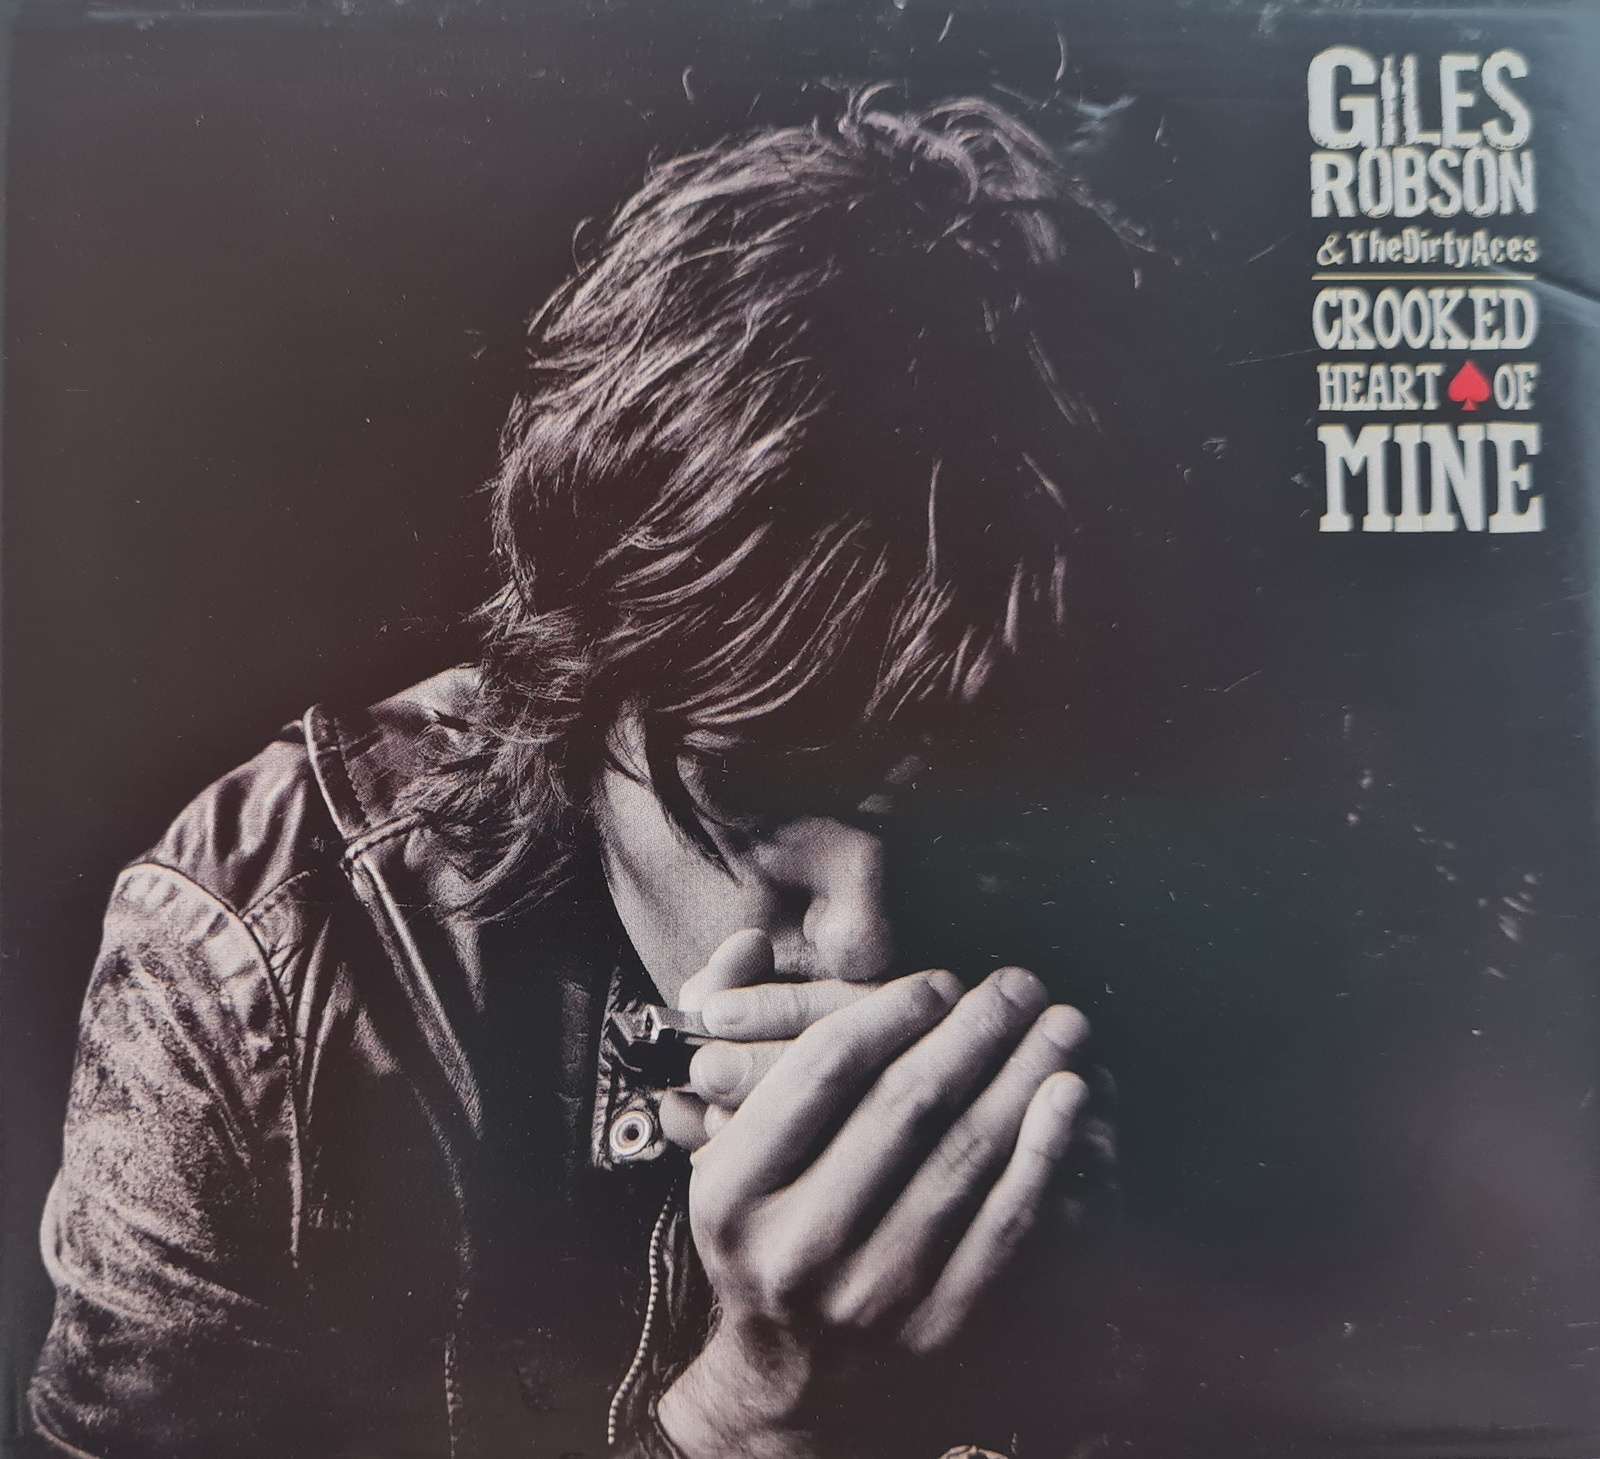 Giles Robson & The Dirty Aces - Crooked Heart of Mine (CD)